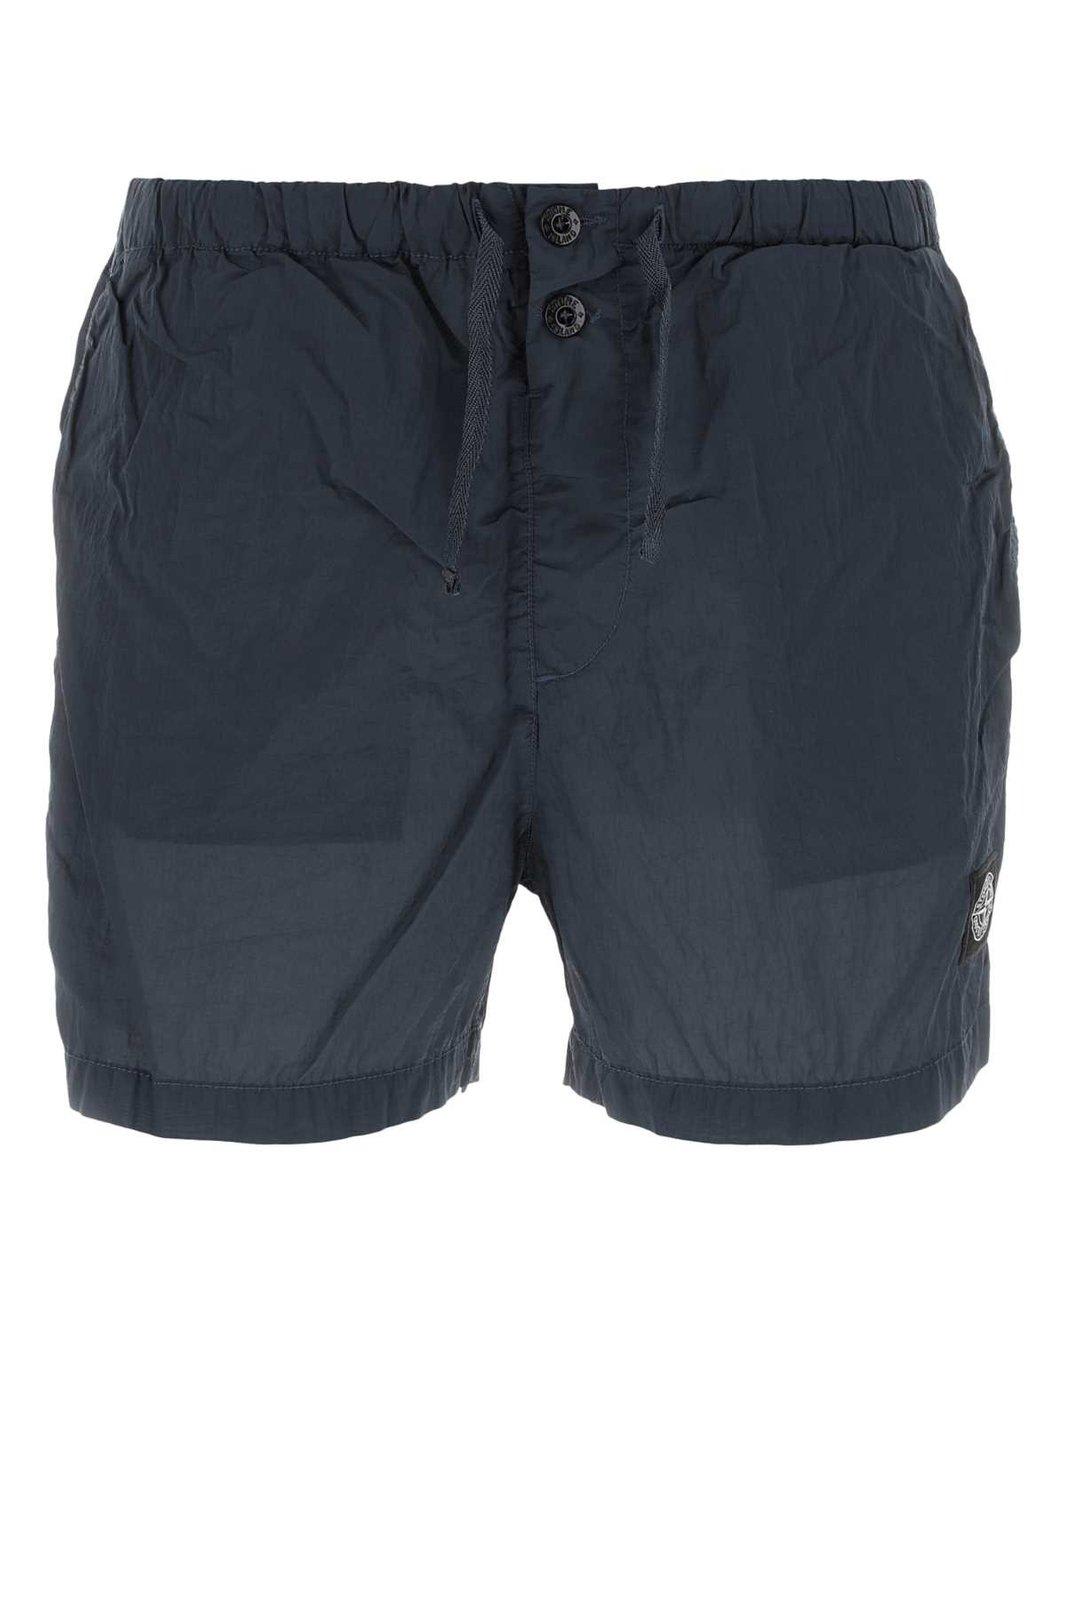 STONE ISLAND LOGO PATCH BUTTONED SHORTS